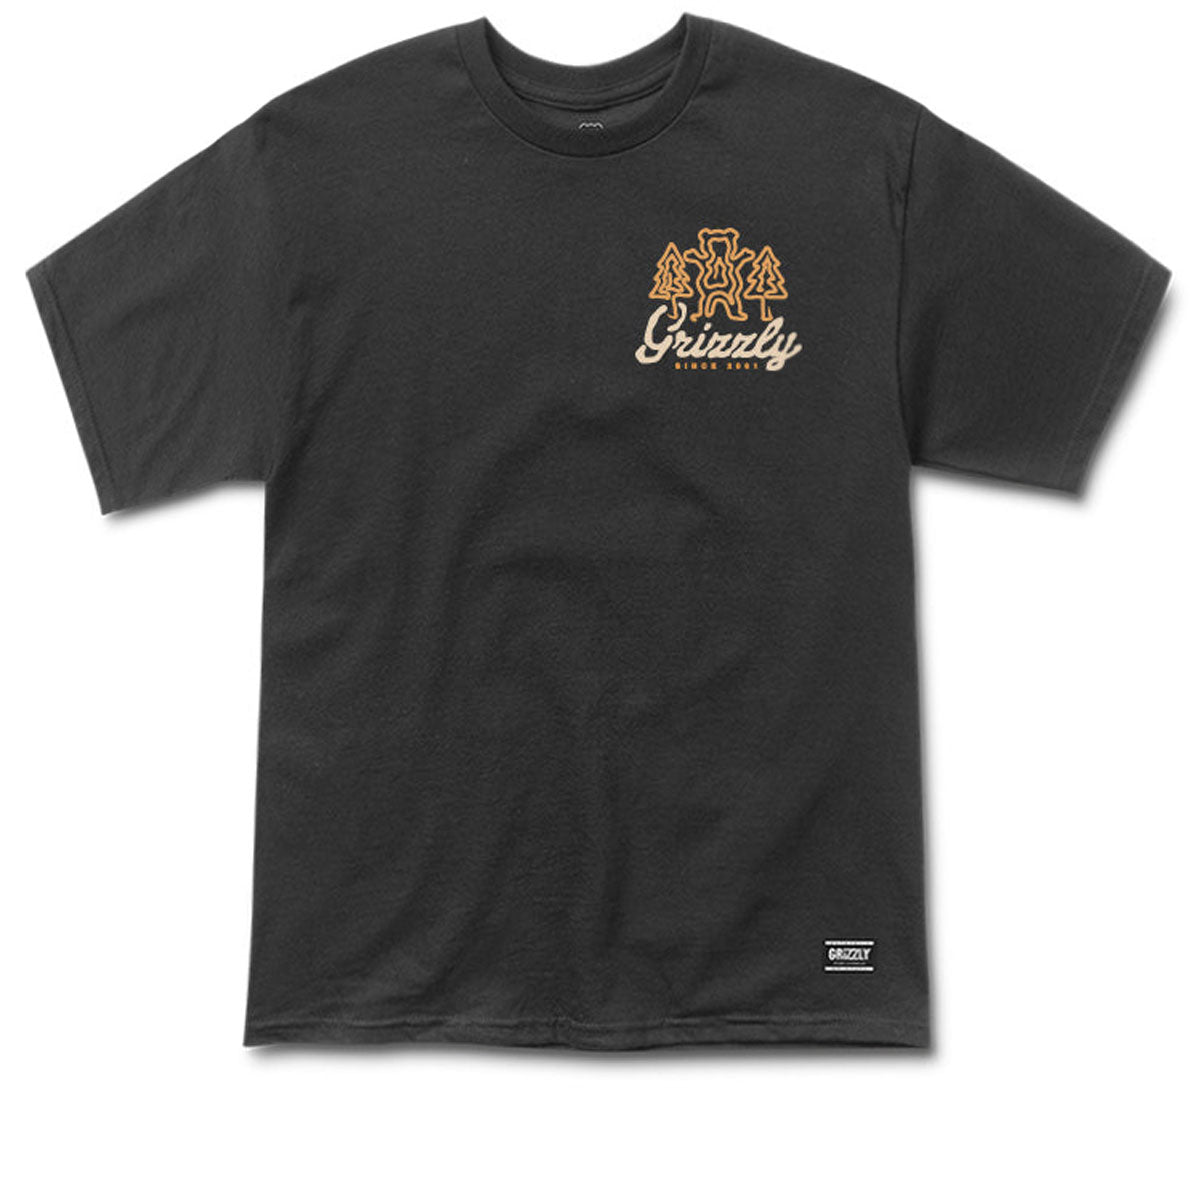 Grizzly Windy Creek T-Shirt - Black image 2